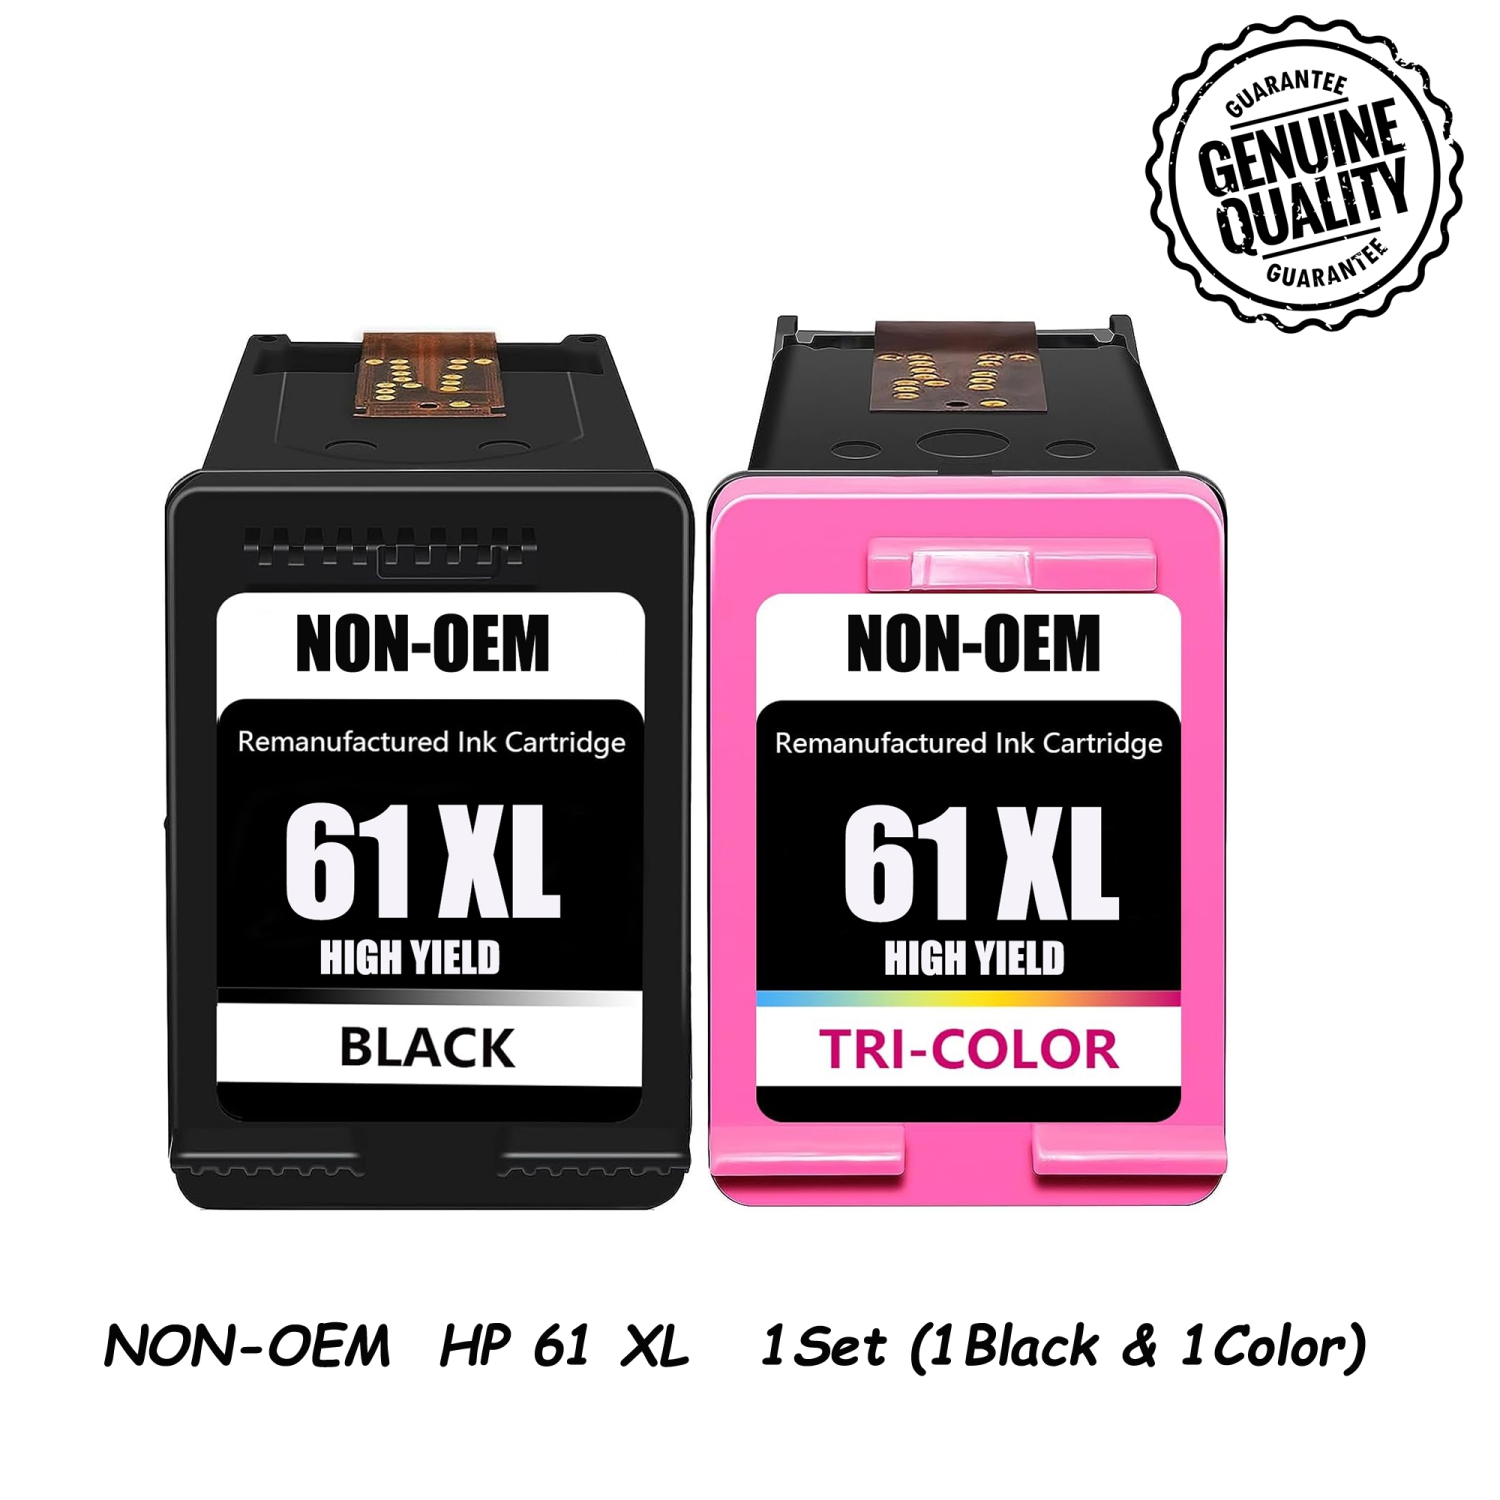 [High Yield] 1 Set Remanufactured Ink Cartridge Replacement for HP 61XL for HP Envy 4500 5530 Deskjet 1000 1050 1512 1513 2540 2542 2549 3510 3050 3050A 4630 5530